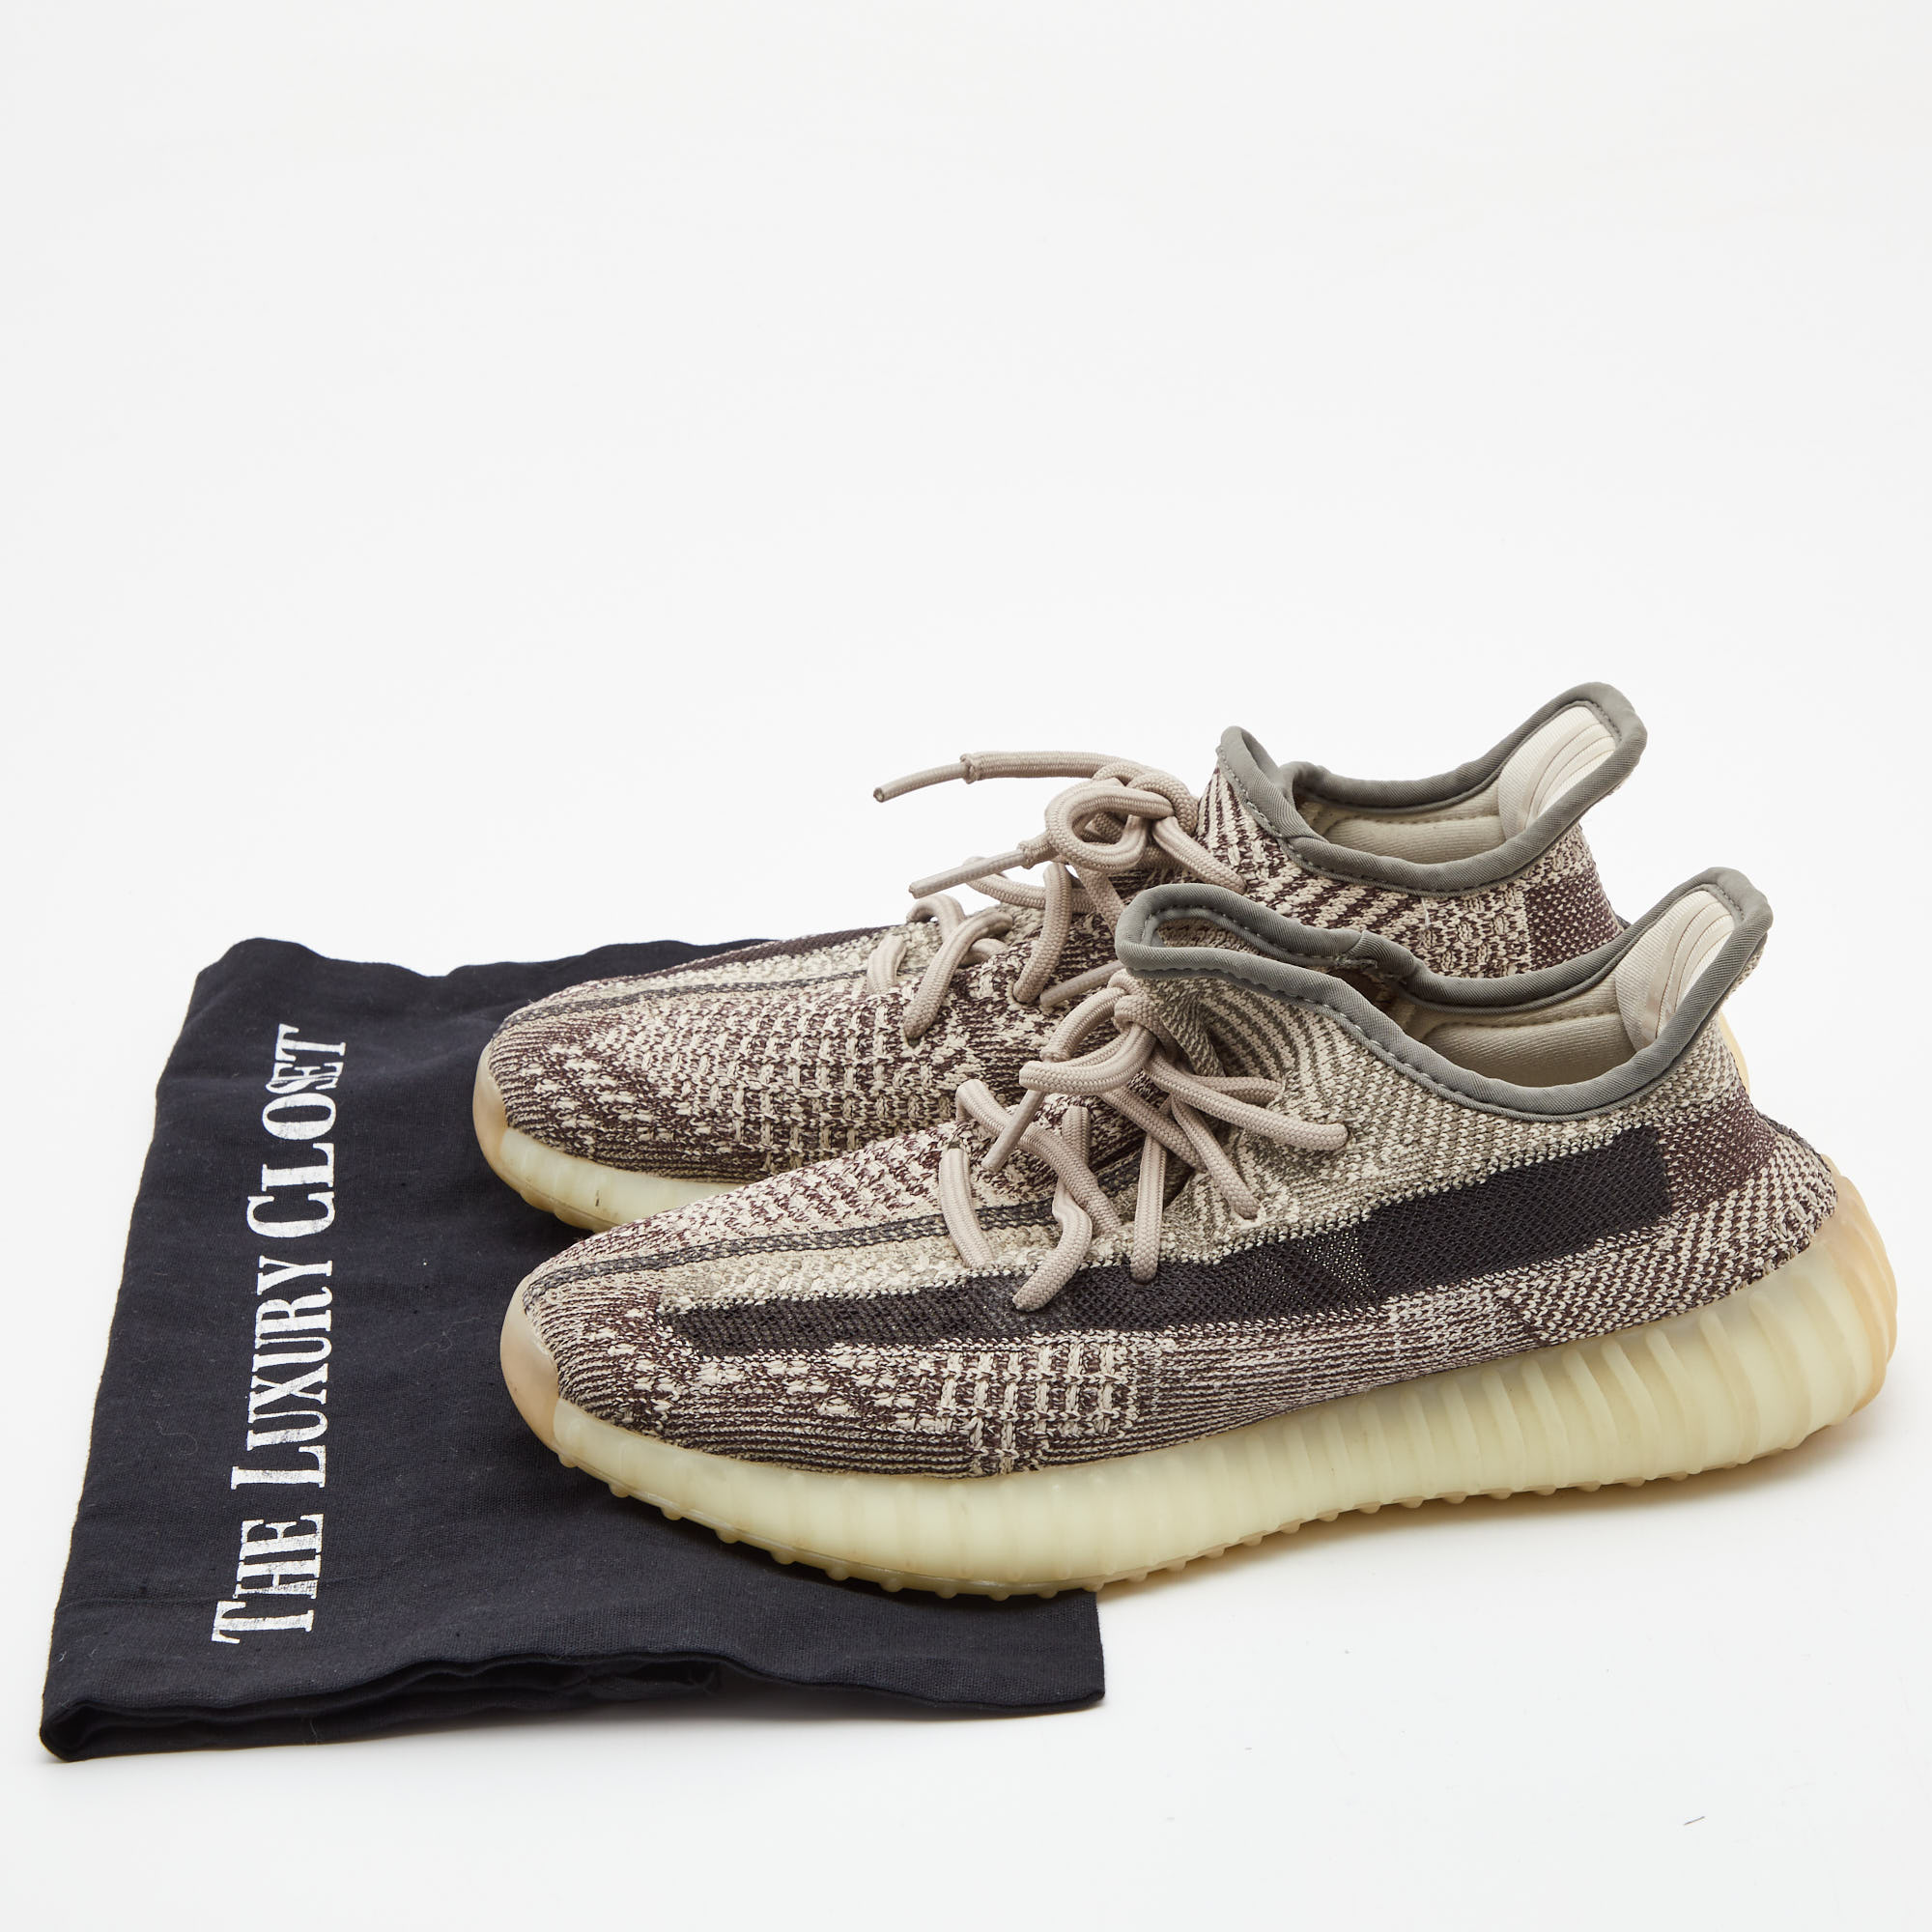 Yeezy X Adidas Brown Knit Fabric Boost 350 V2 Zyon Sneakers Size 38